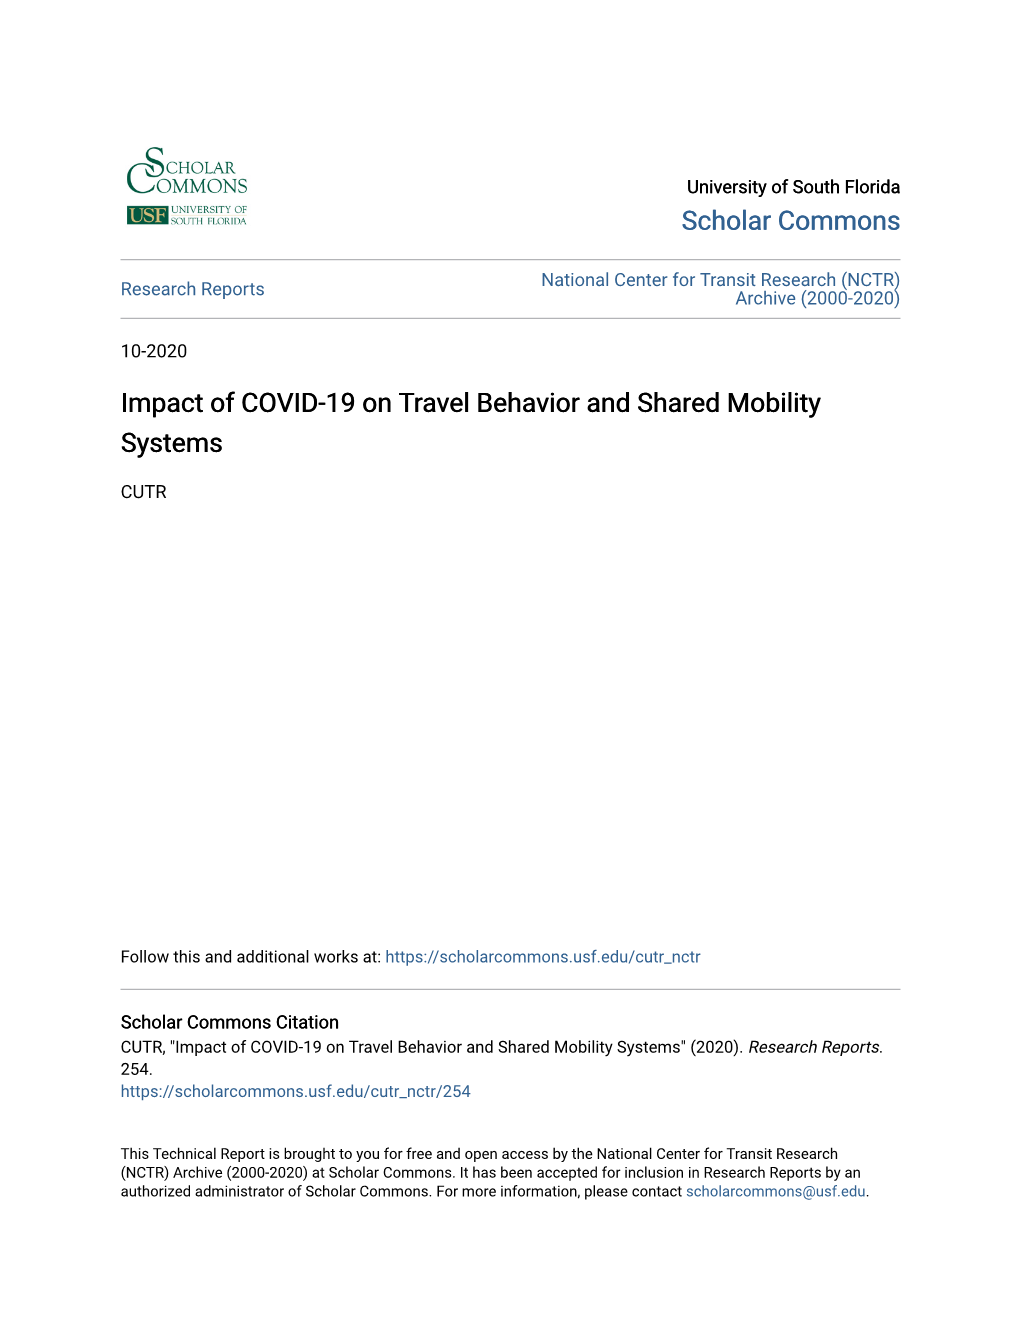 Impact of COVID-19 on Travel Behavior and Shared Mobility Systems